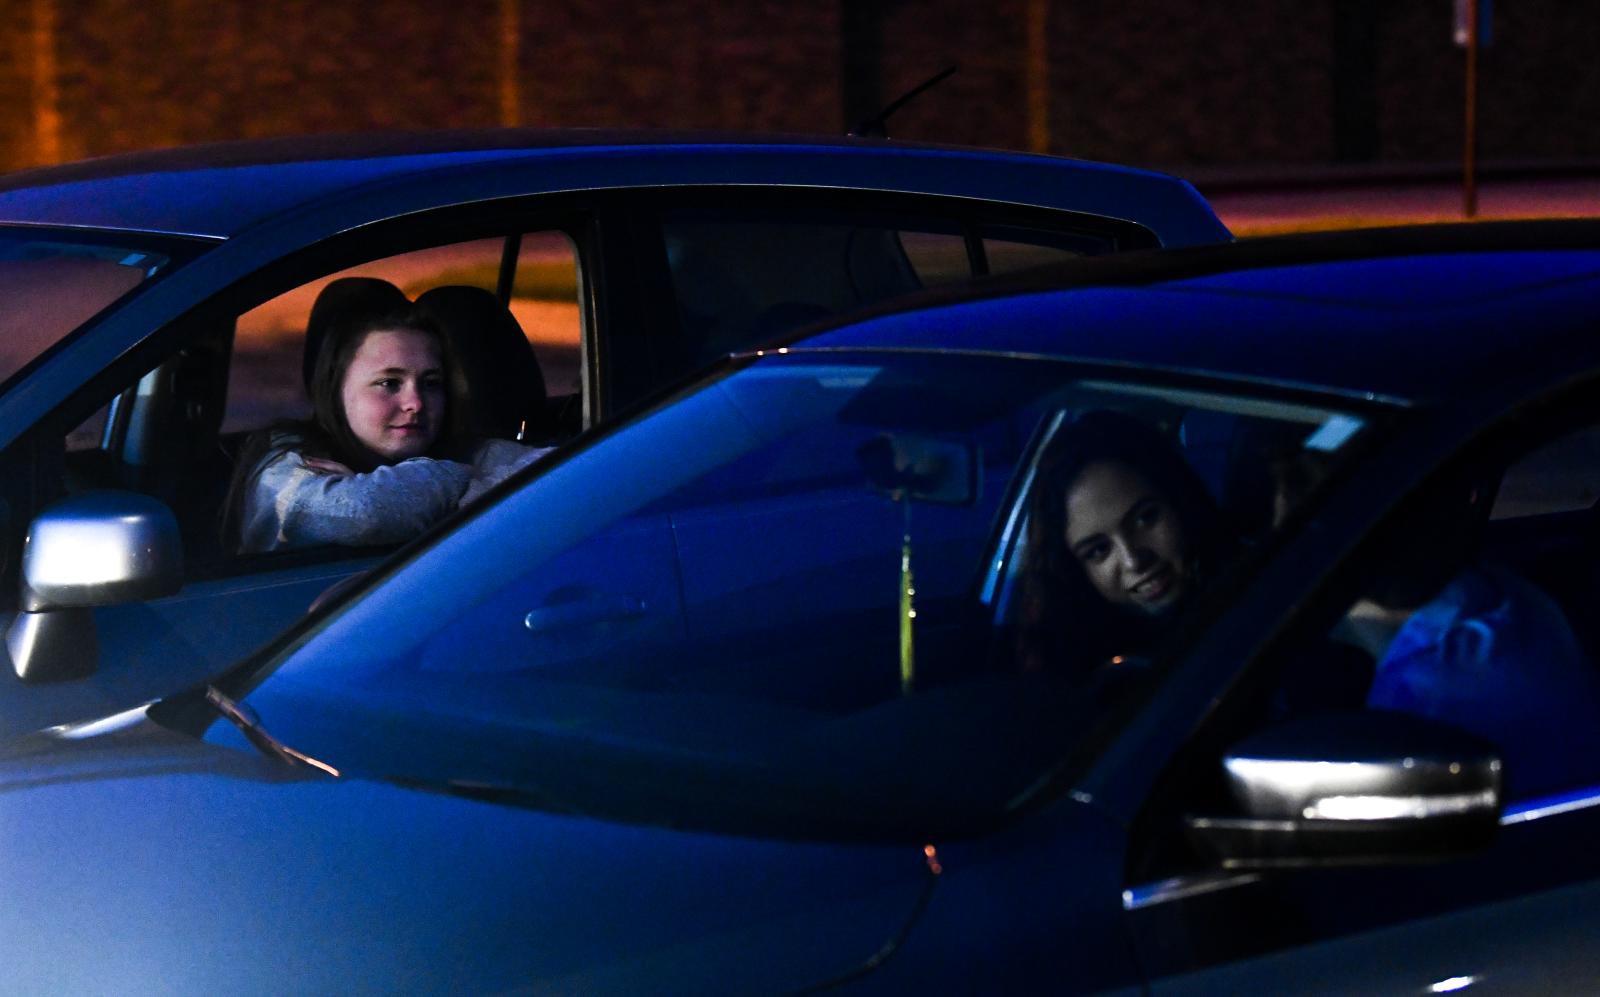 Rock Bridge seniors Madi Polnika, left, 18, Kennedy Robbins, center, 18, and Joseph Gard, right, 18, talk in the school parking lot on April 17, 2020 at Rock Bridge High School in Columbia, Missouri. The three talked about what was happening in their lives now that their year had been cut short due to the COVID-19 pandemic.